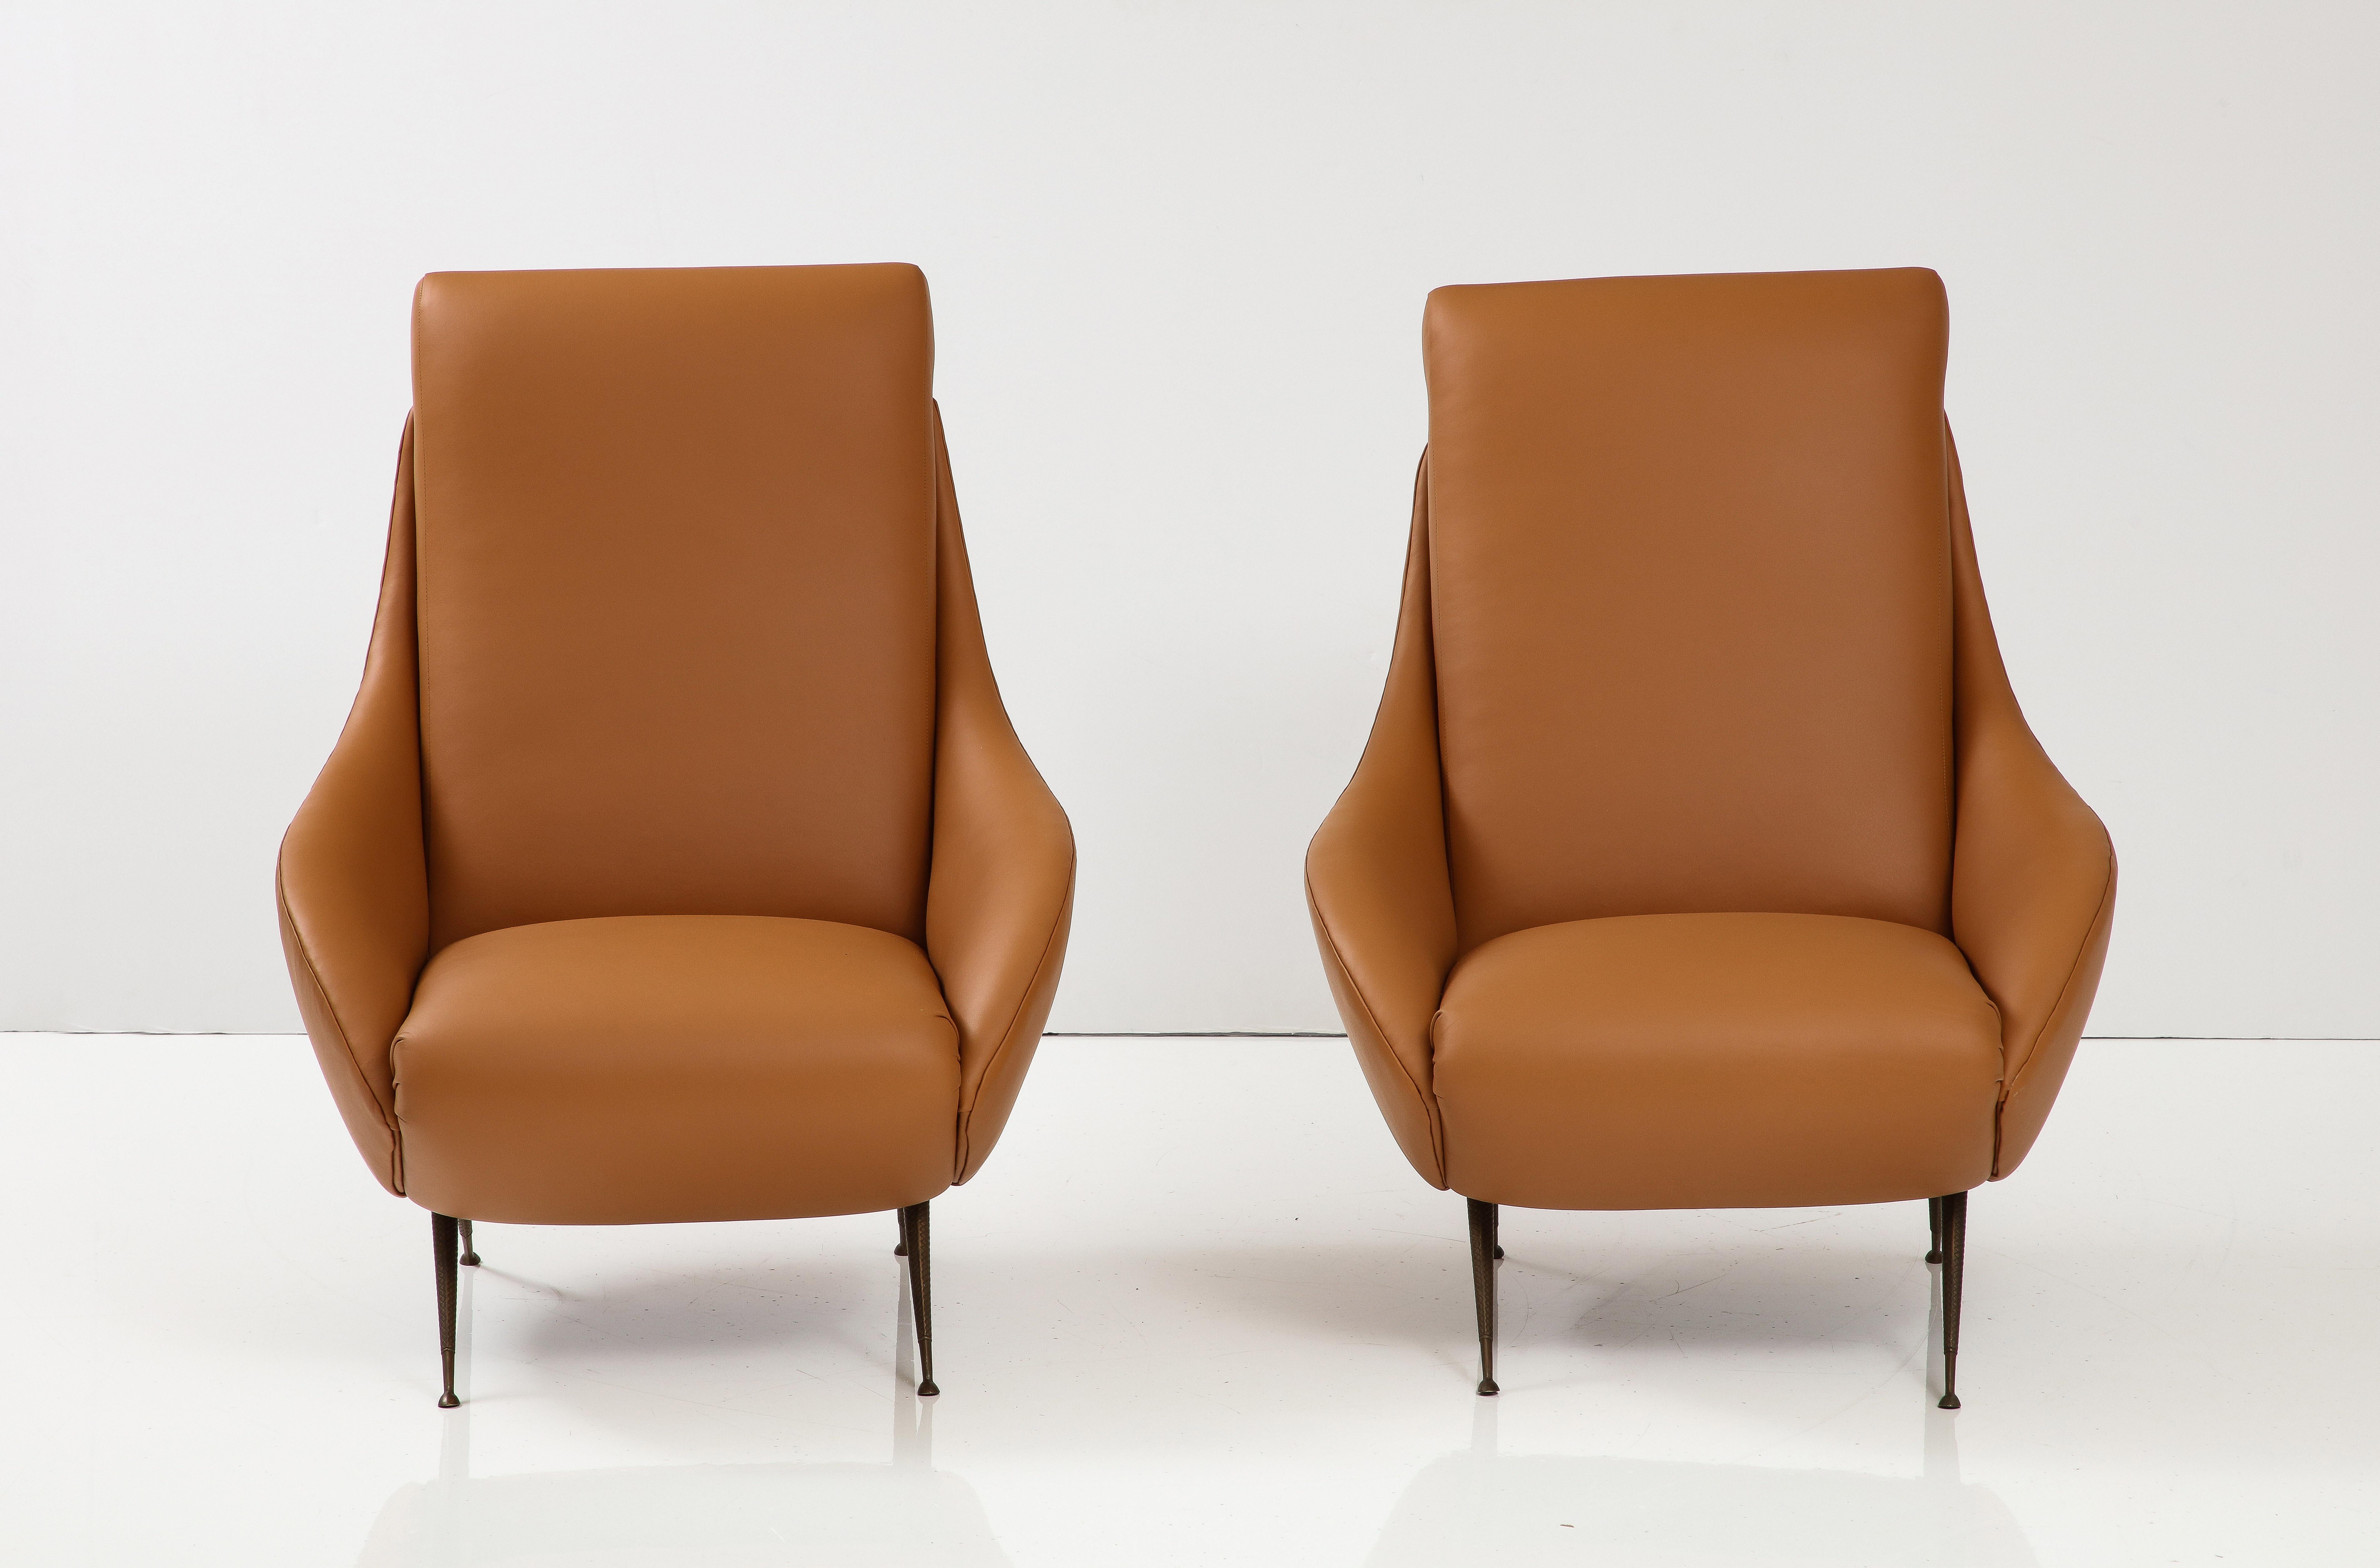 A pair of Italian modernist lounge or slipper chairs; highly sculptural in form, with metal cross-hatch motif tapered legs.  Newly re-upholstered in our professional studio with Italian camel-colored leather.  
Italy, circa 1950 
Size: 37